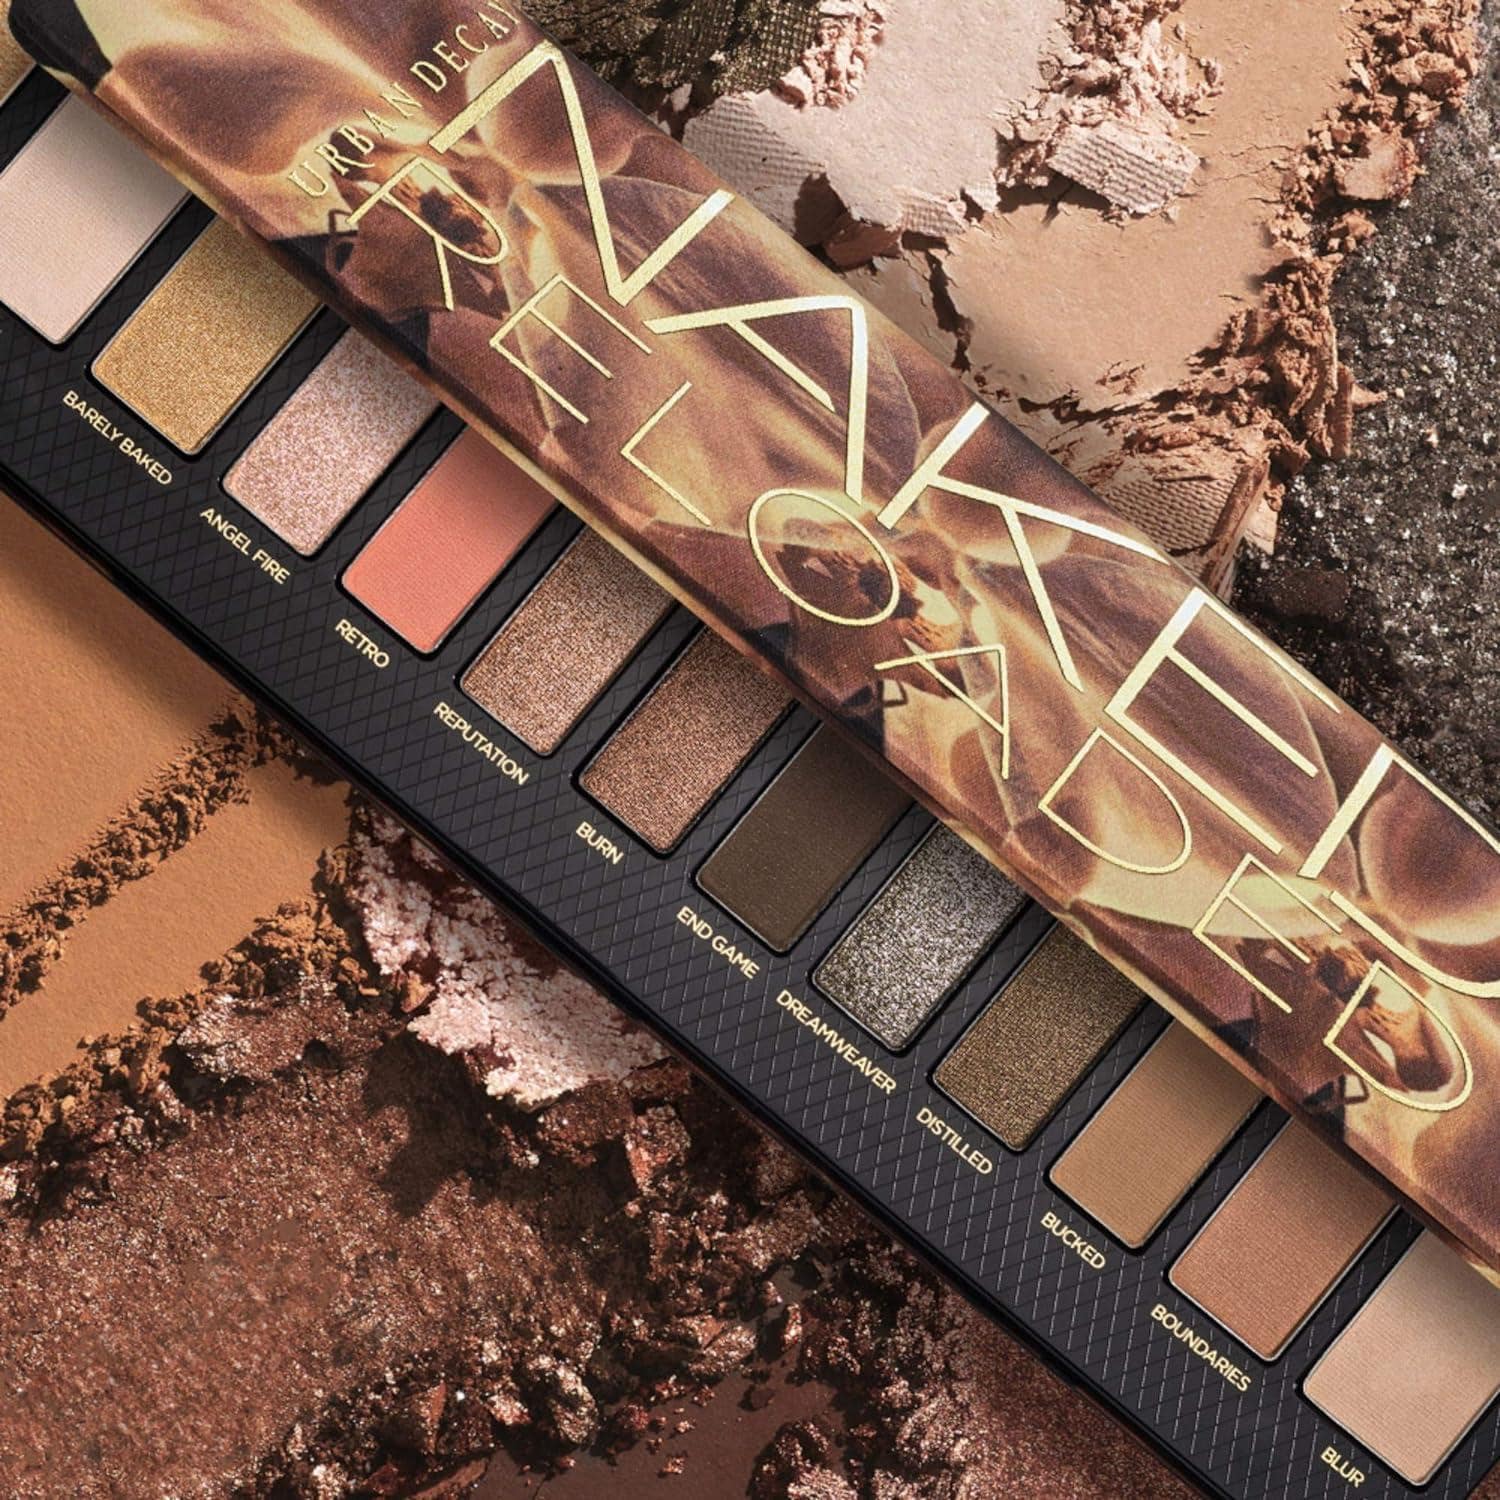 a beauty journey with the Urban Decay Naked Reloaded Eyeshadow Palette! This affordable eyeshadow palette, with 12 cool and neutral-leaning shades, provides a cohesive color story and rich pigmentation for endless eye looks.
